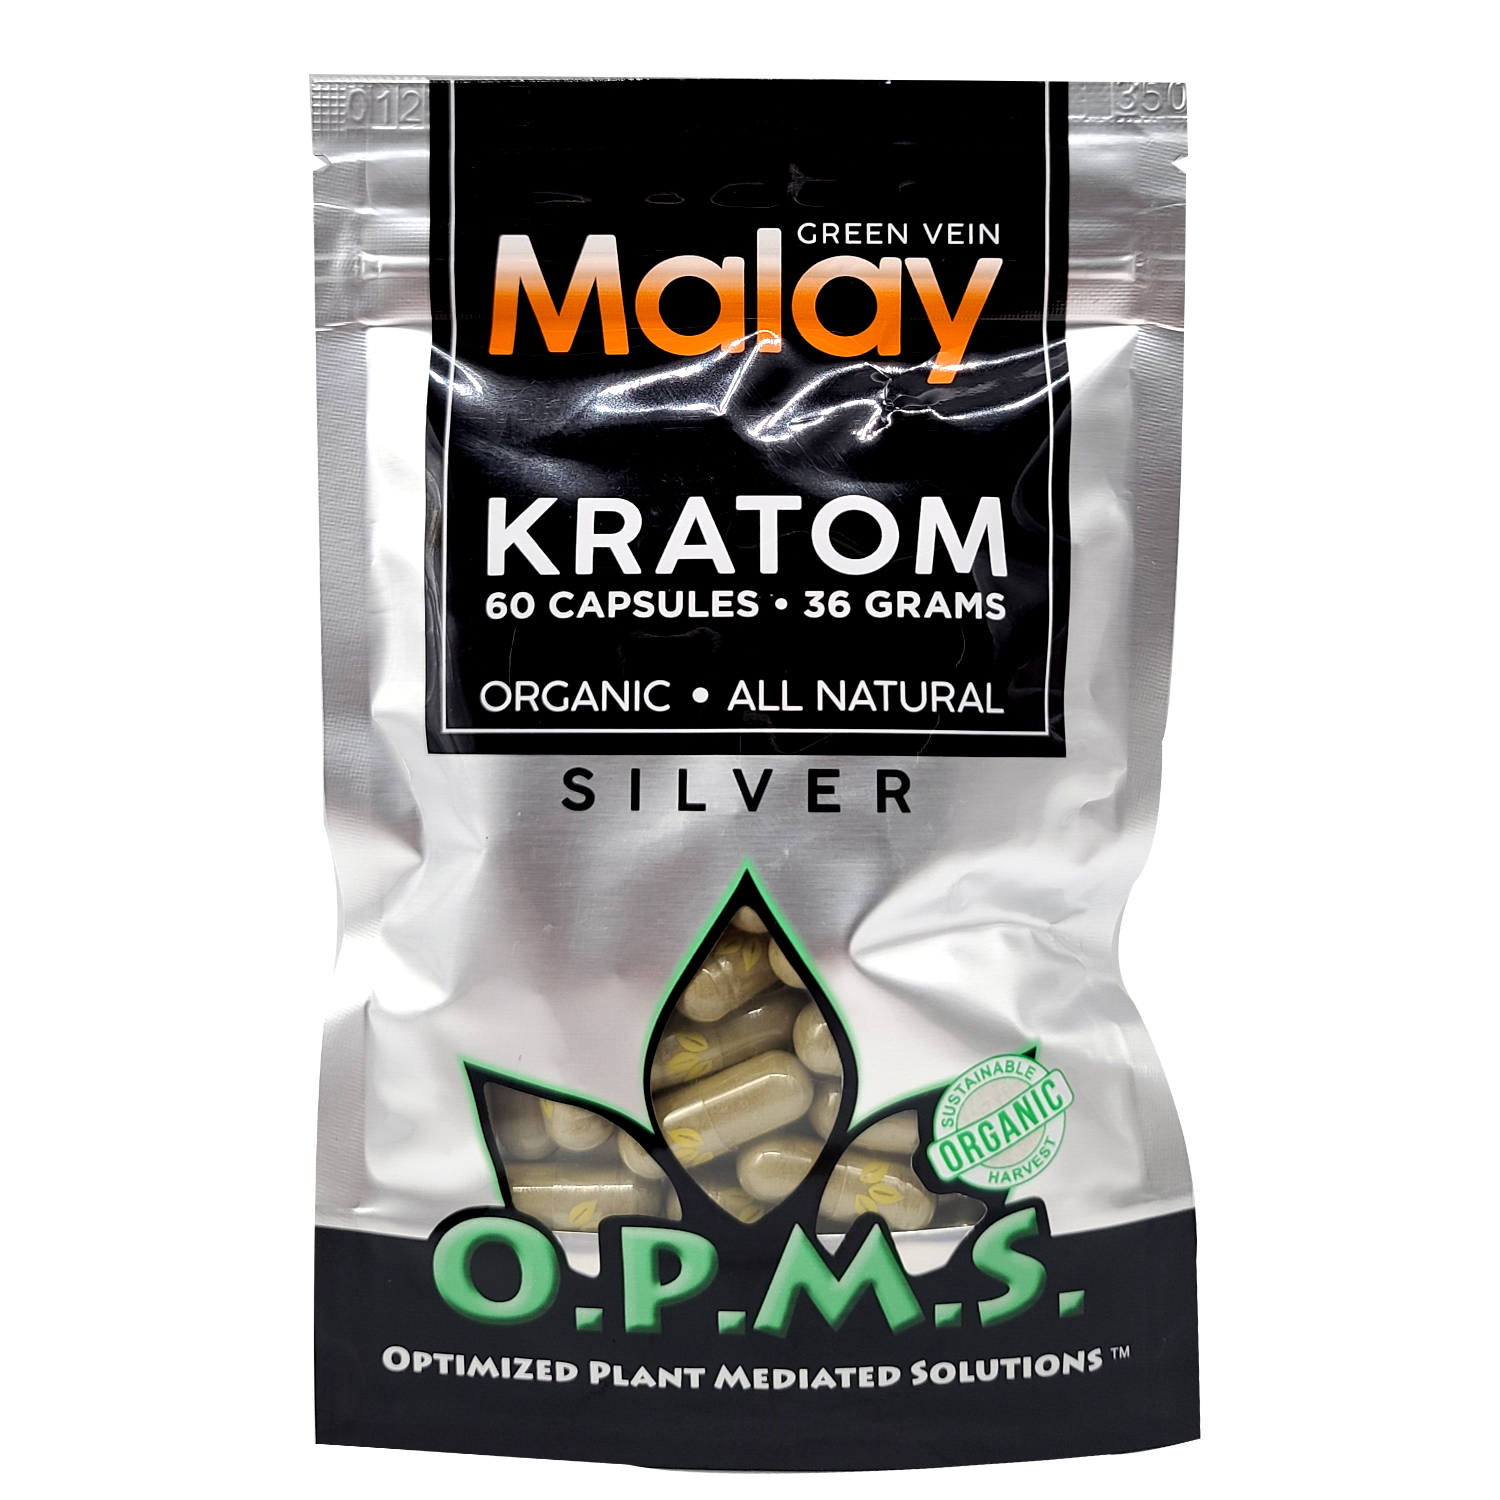 60ct OPMS Silver Green Vein Malay Kratom Extract Capsules